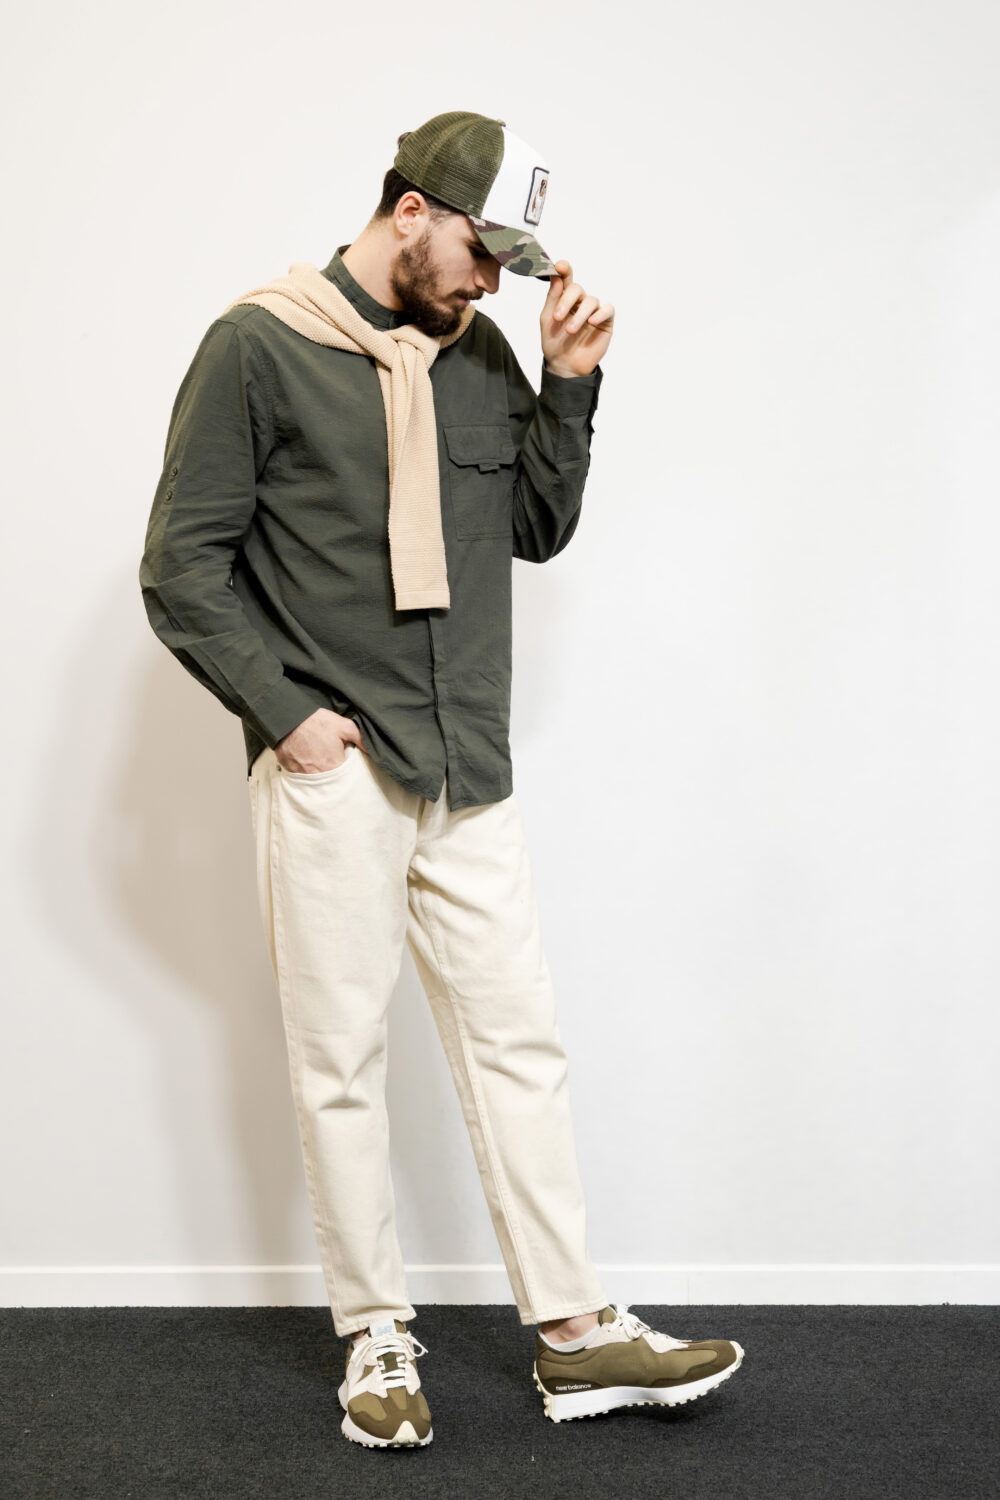 OUTFIT UOMO LOOSE FIT MILITARE #8361 - Foto 1